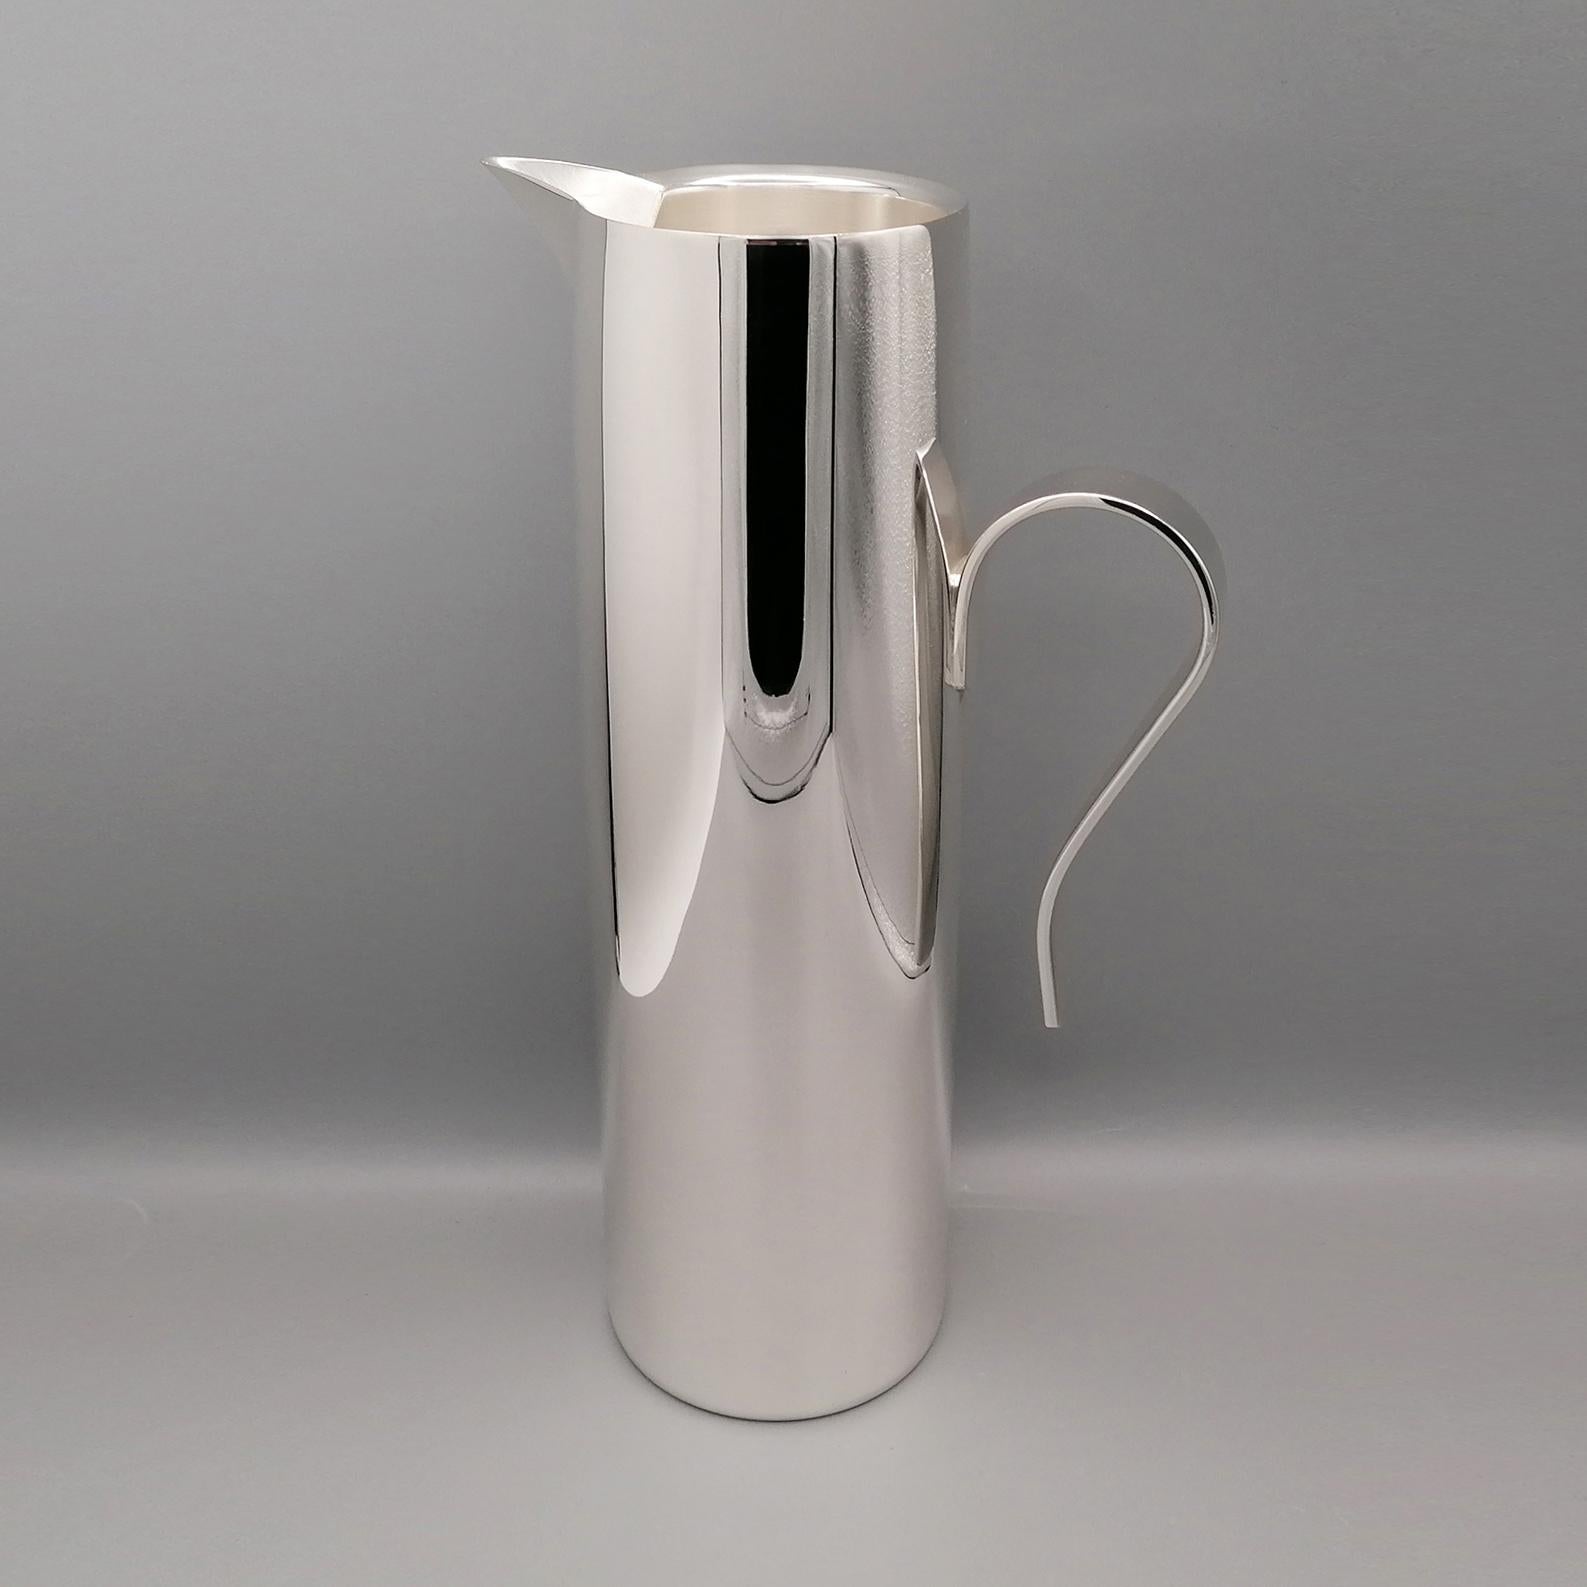 Sterling silver jug with a modern, essential and minimalist line.
Made with a shiny finish, it was worked starting from two 925 silver sheets, obtaining a space between the internal and external part of the jug, helping to keep it cold or hot